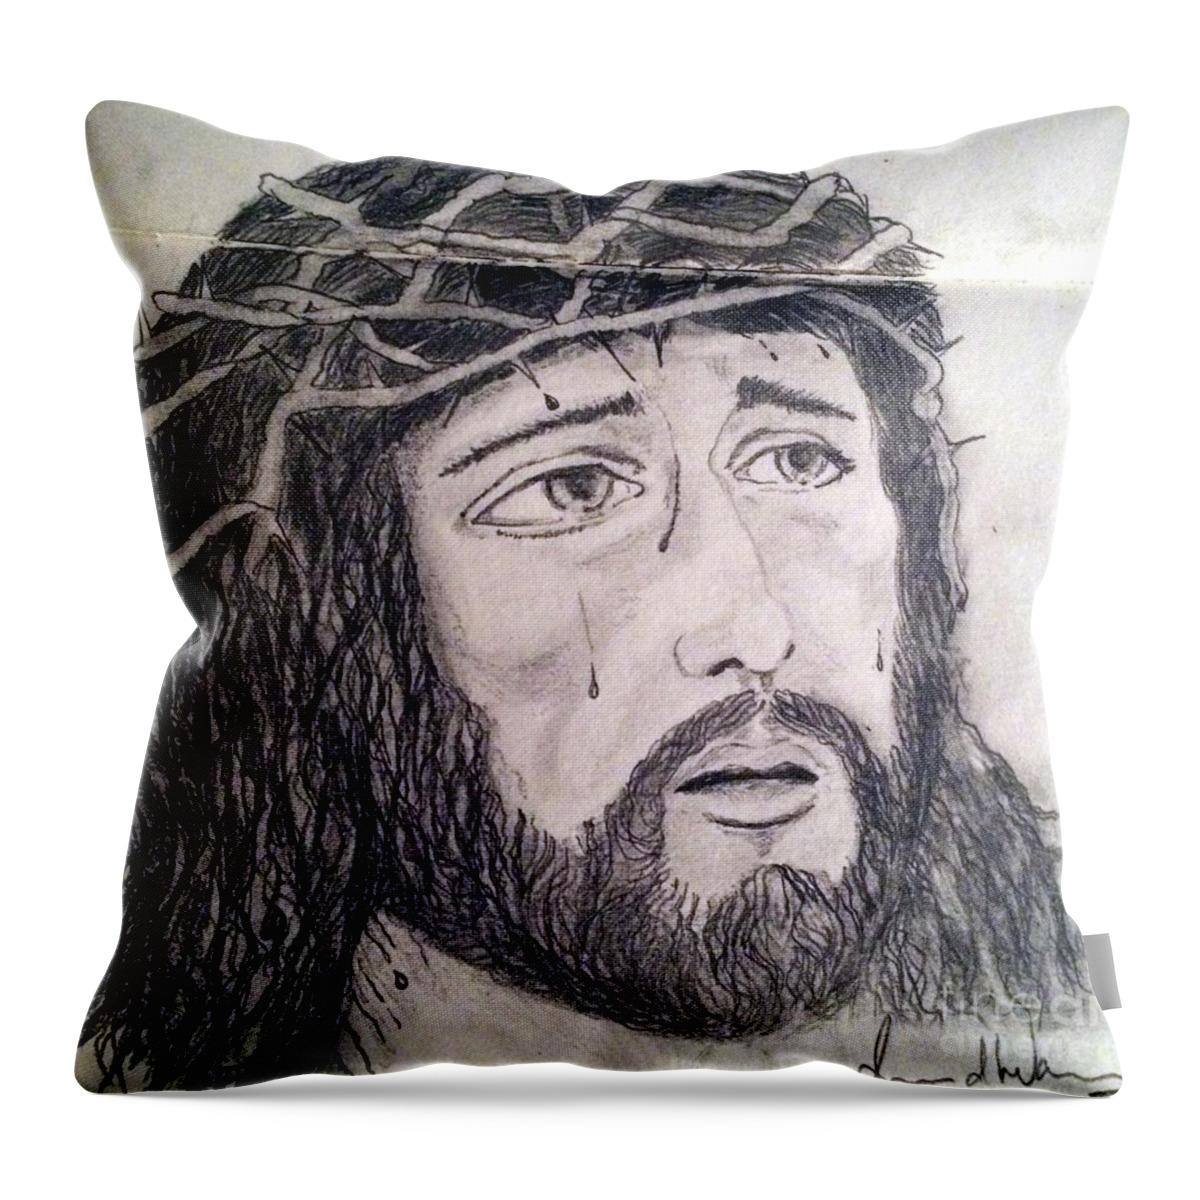 Passion Of Christ Throw Pillow featuring the painting Passion Of Christ by Brindha Naveen